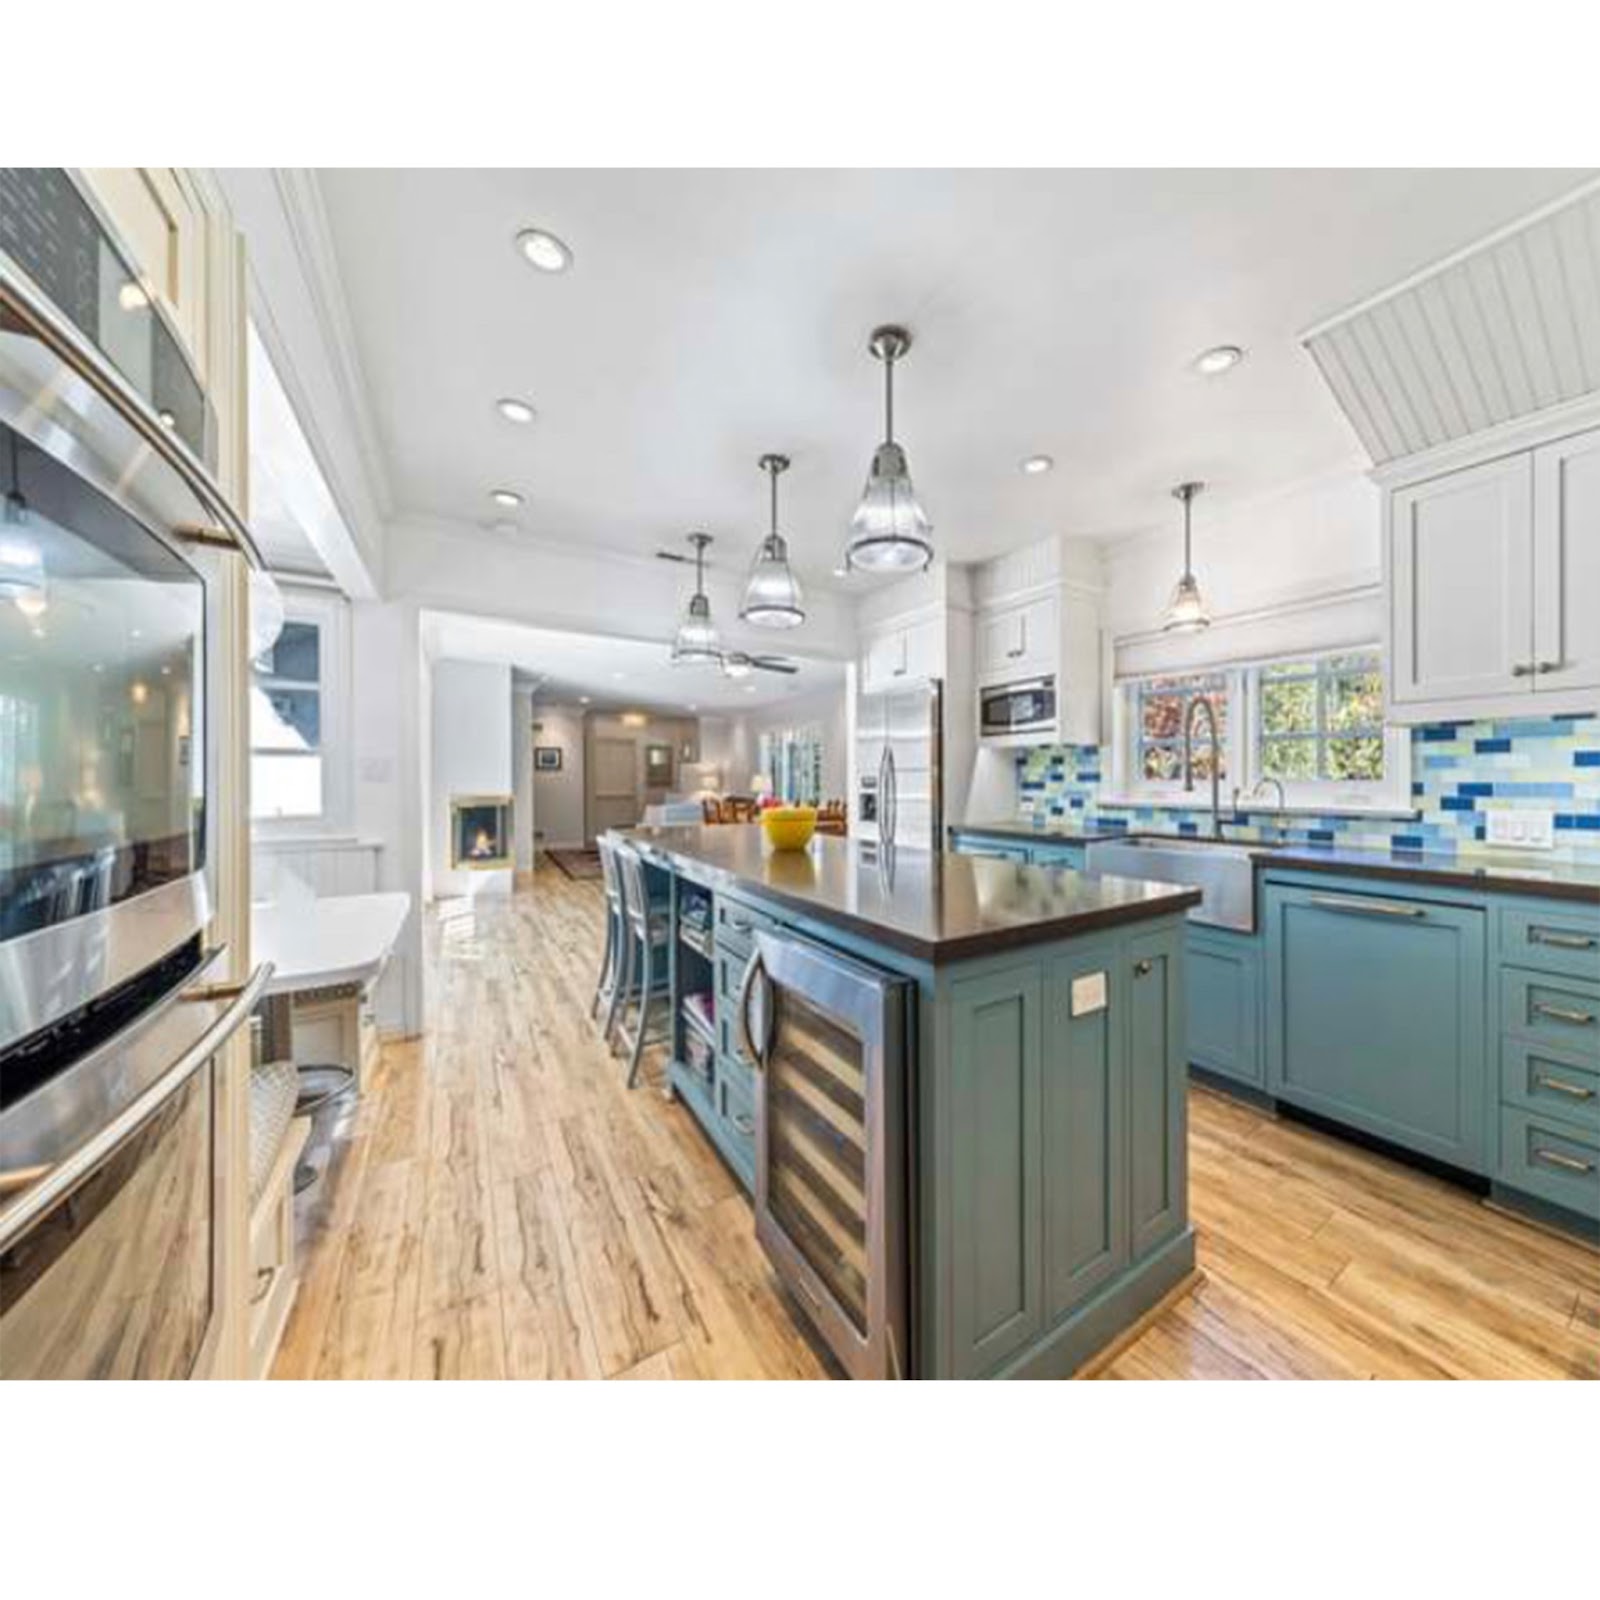 farmhouse kitchen with blue and white cabinetry plus island with wine fridge and pendant lights